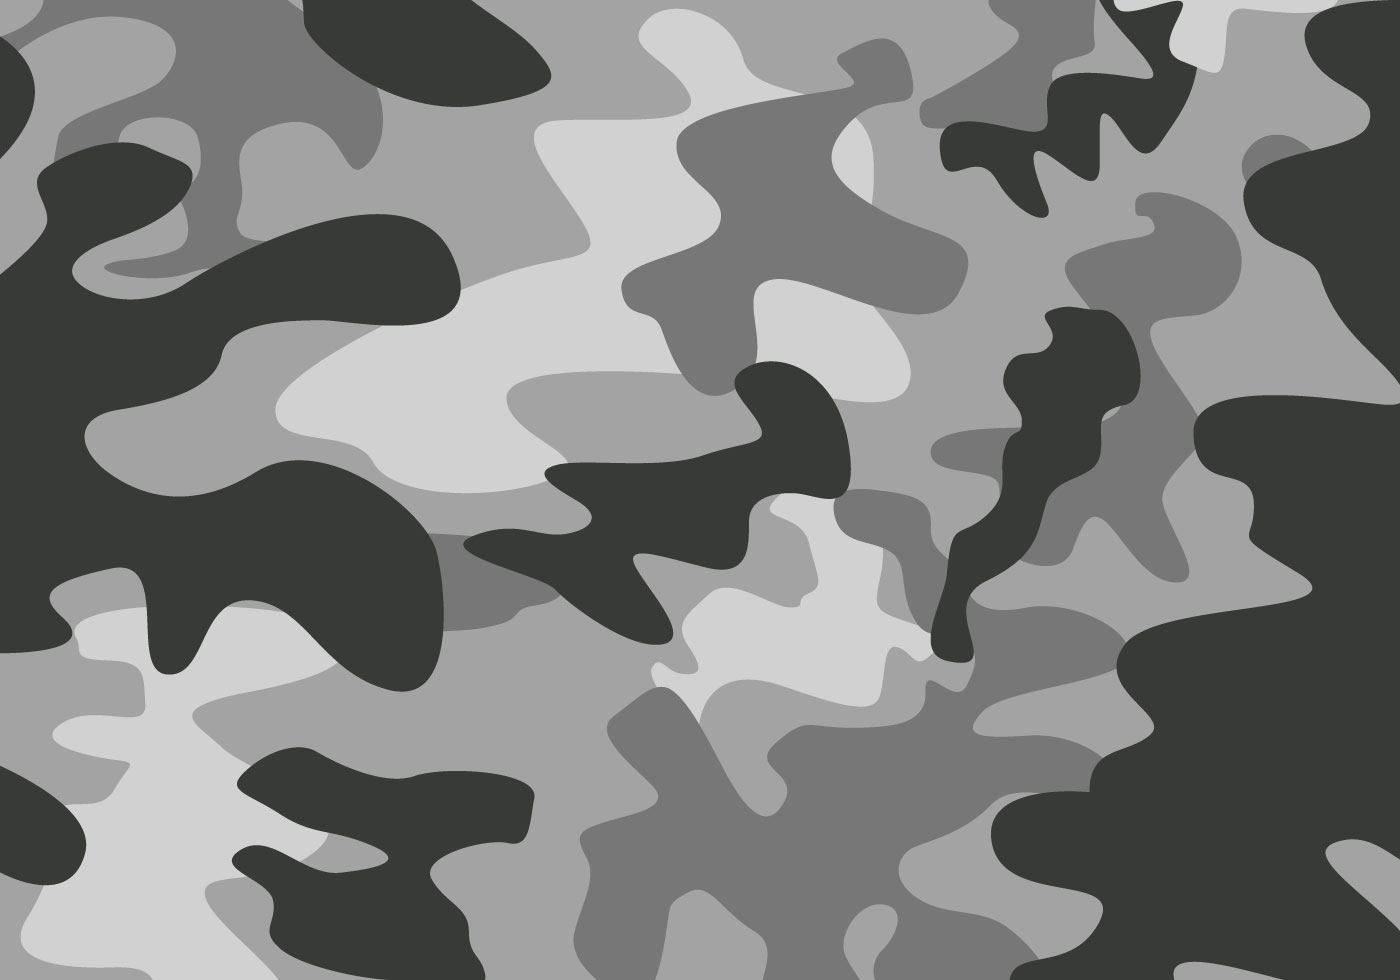 Camouflage Free Vector Art (815 Free Downloads)